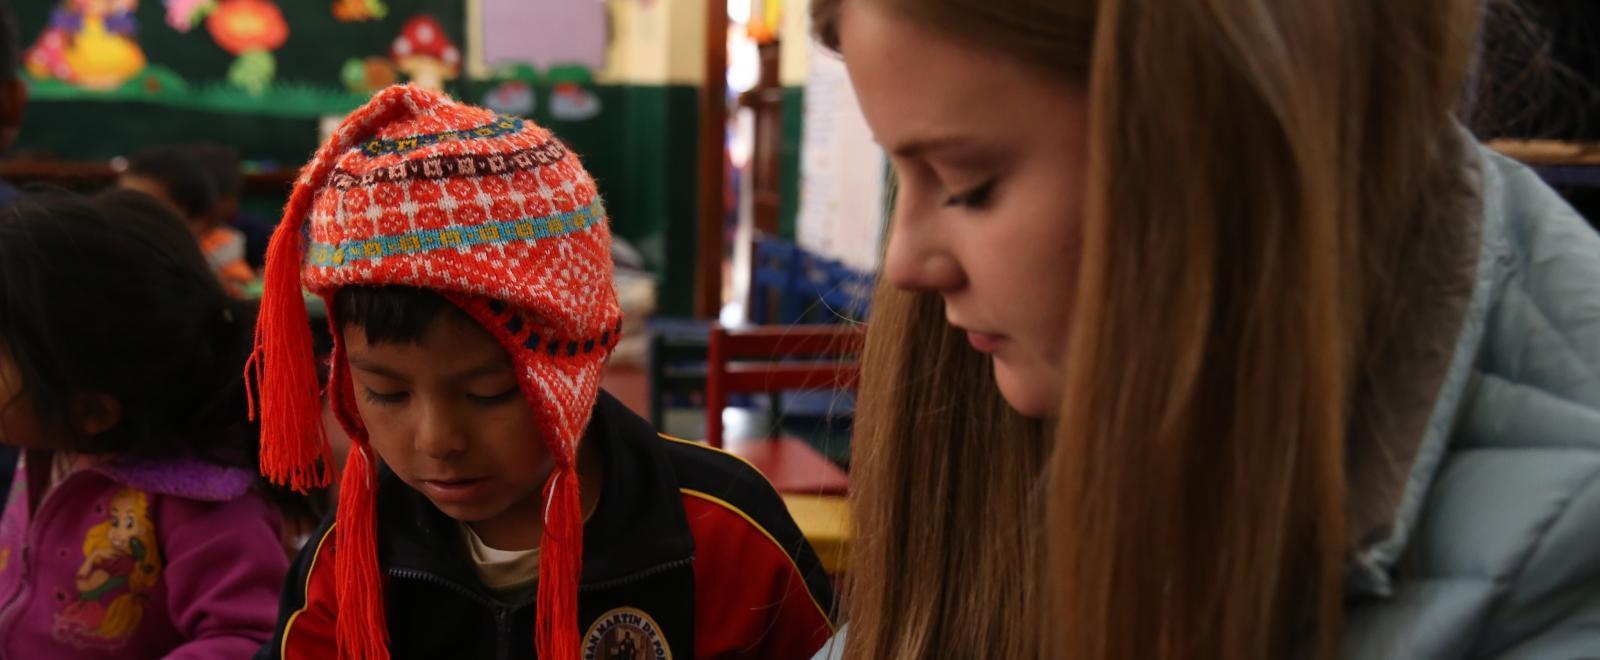 A volunteer working with children in Peru sits with a child in a classroom to help them with an activity.